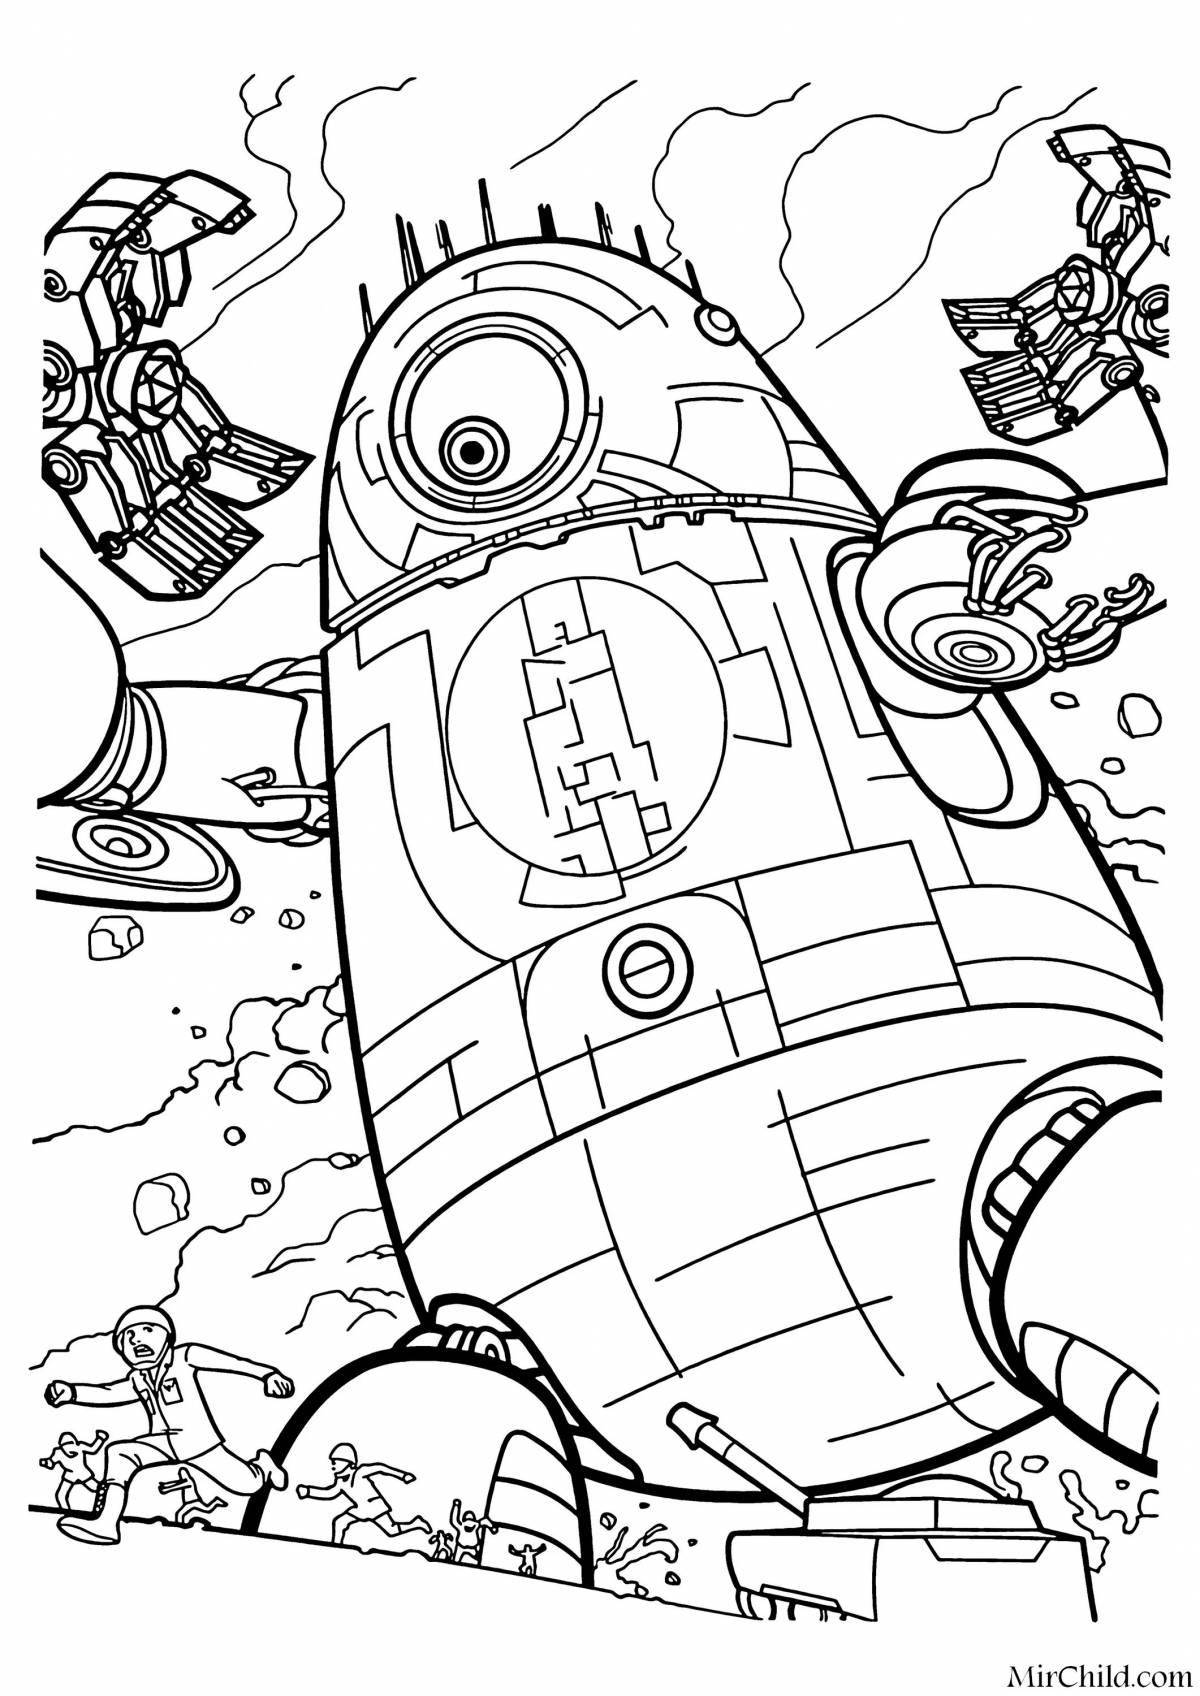 Funny monsters vs aliens coloring book